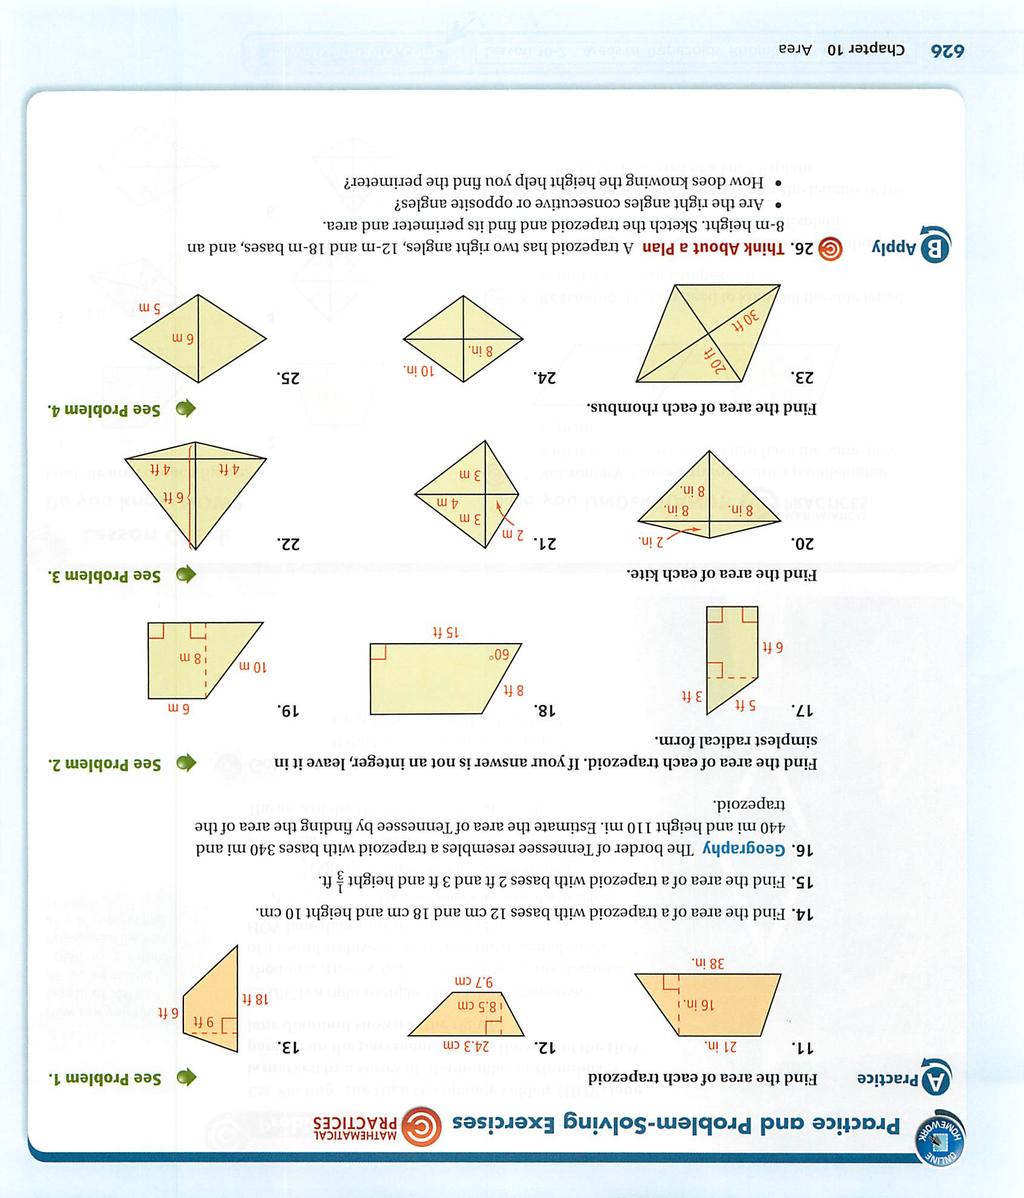 Practice and Problem-Solving Exercises MATHEMATICAL PRACTICES Practice Find the area of each trapezoid ^ See Problem 1. 11. 21 in. 12. 24.3 cm 13. 16 in. I 38 In. j 8.5 cm 9.7 cm 18 ft 1] Vft 6 ft 14.